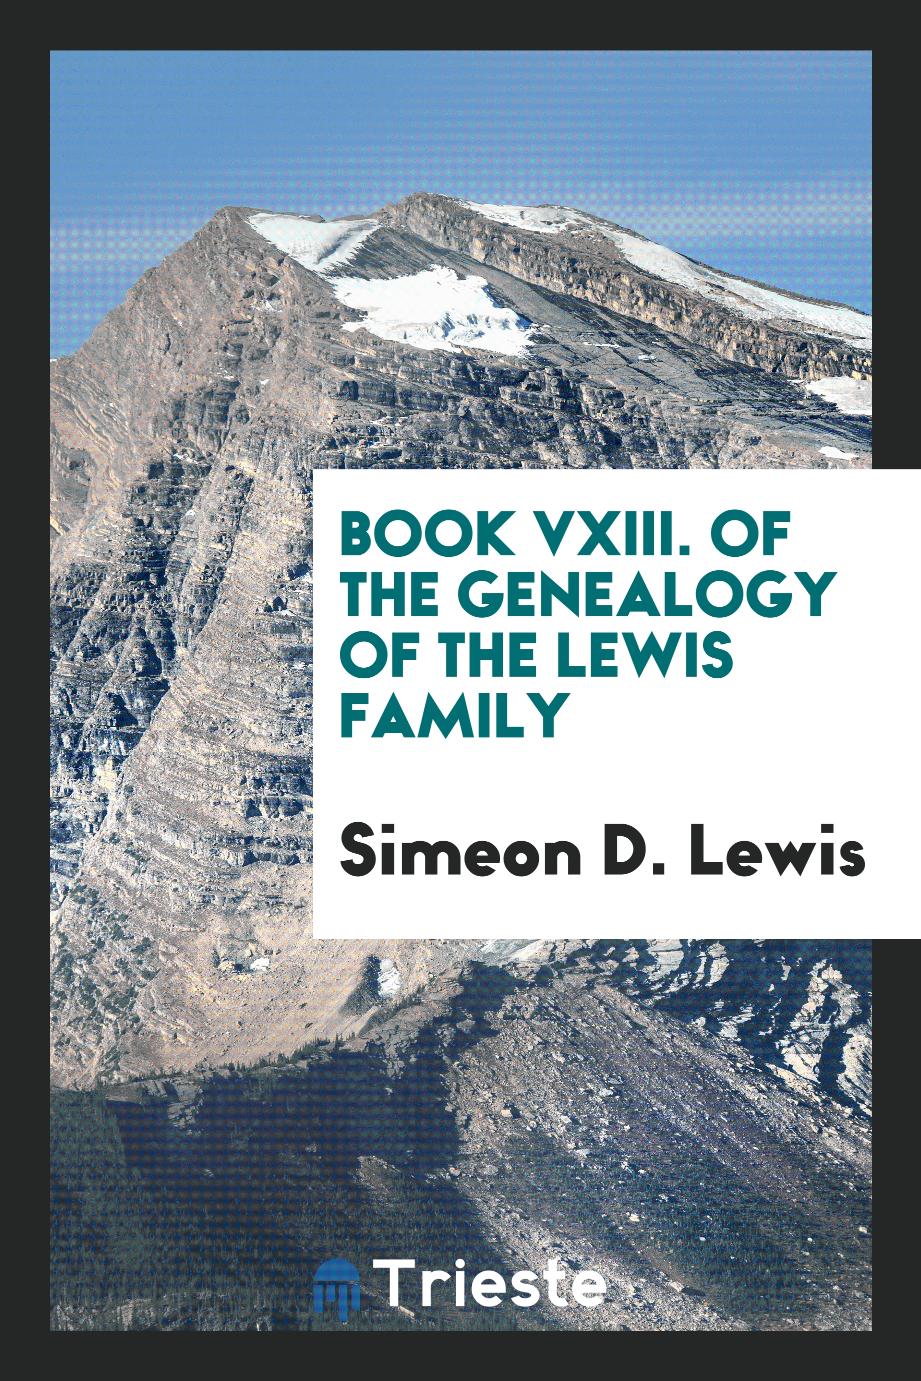 Book VXIII. of the Genealogy of the Lewis Family